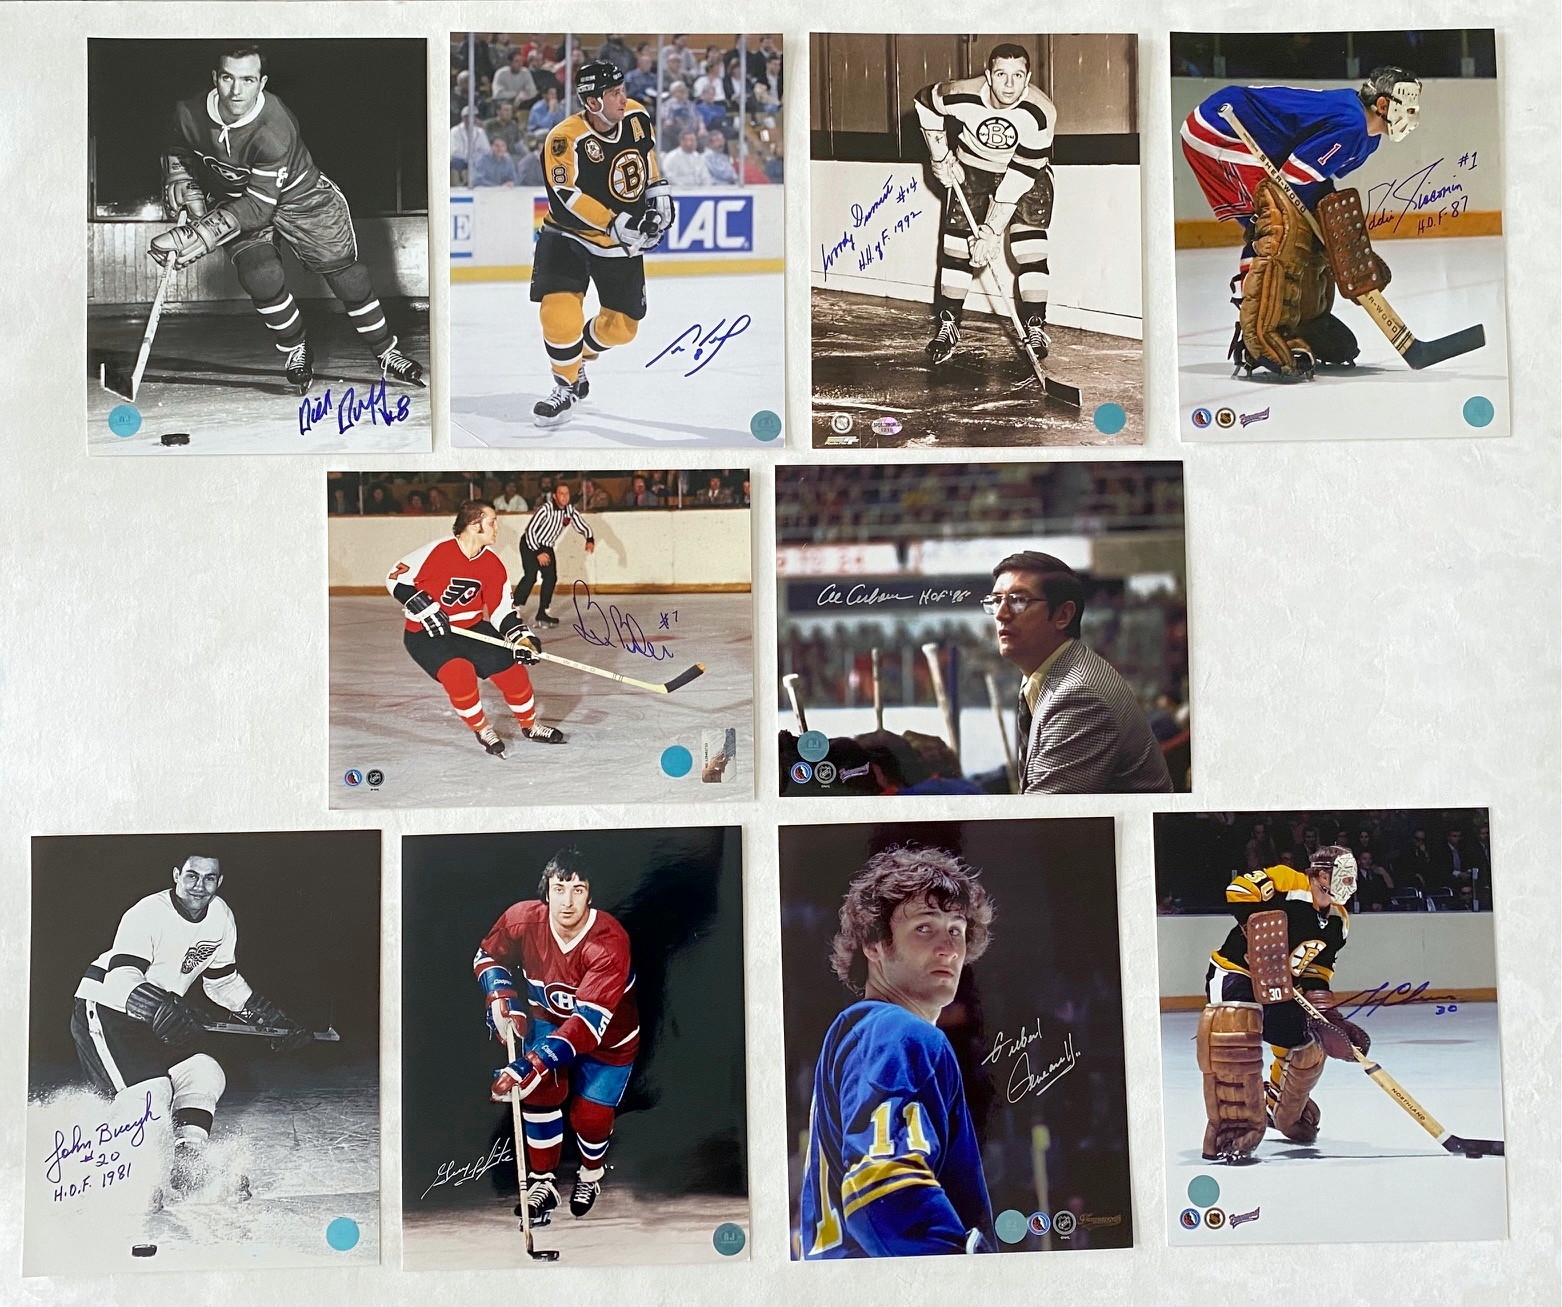 Hockey Hall of Famer Lot of 10 Signed 8x10 Photos - Neely, Perreault, Cheevers